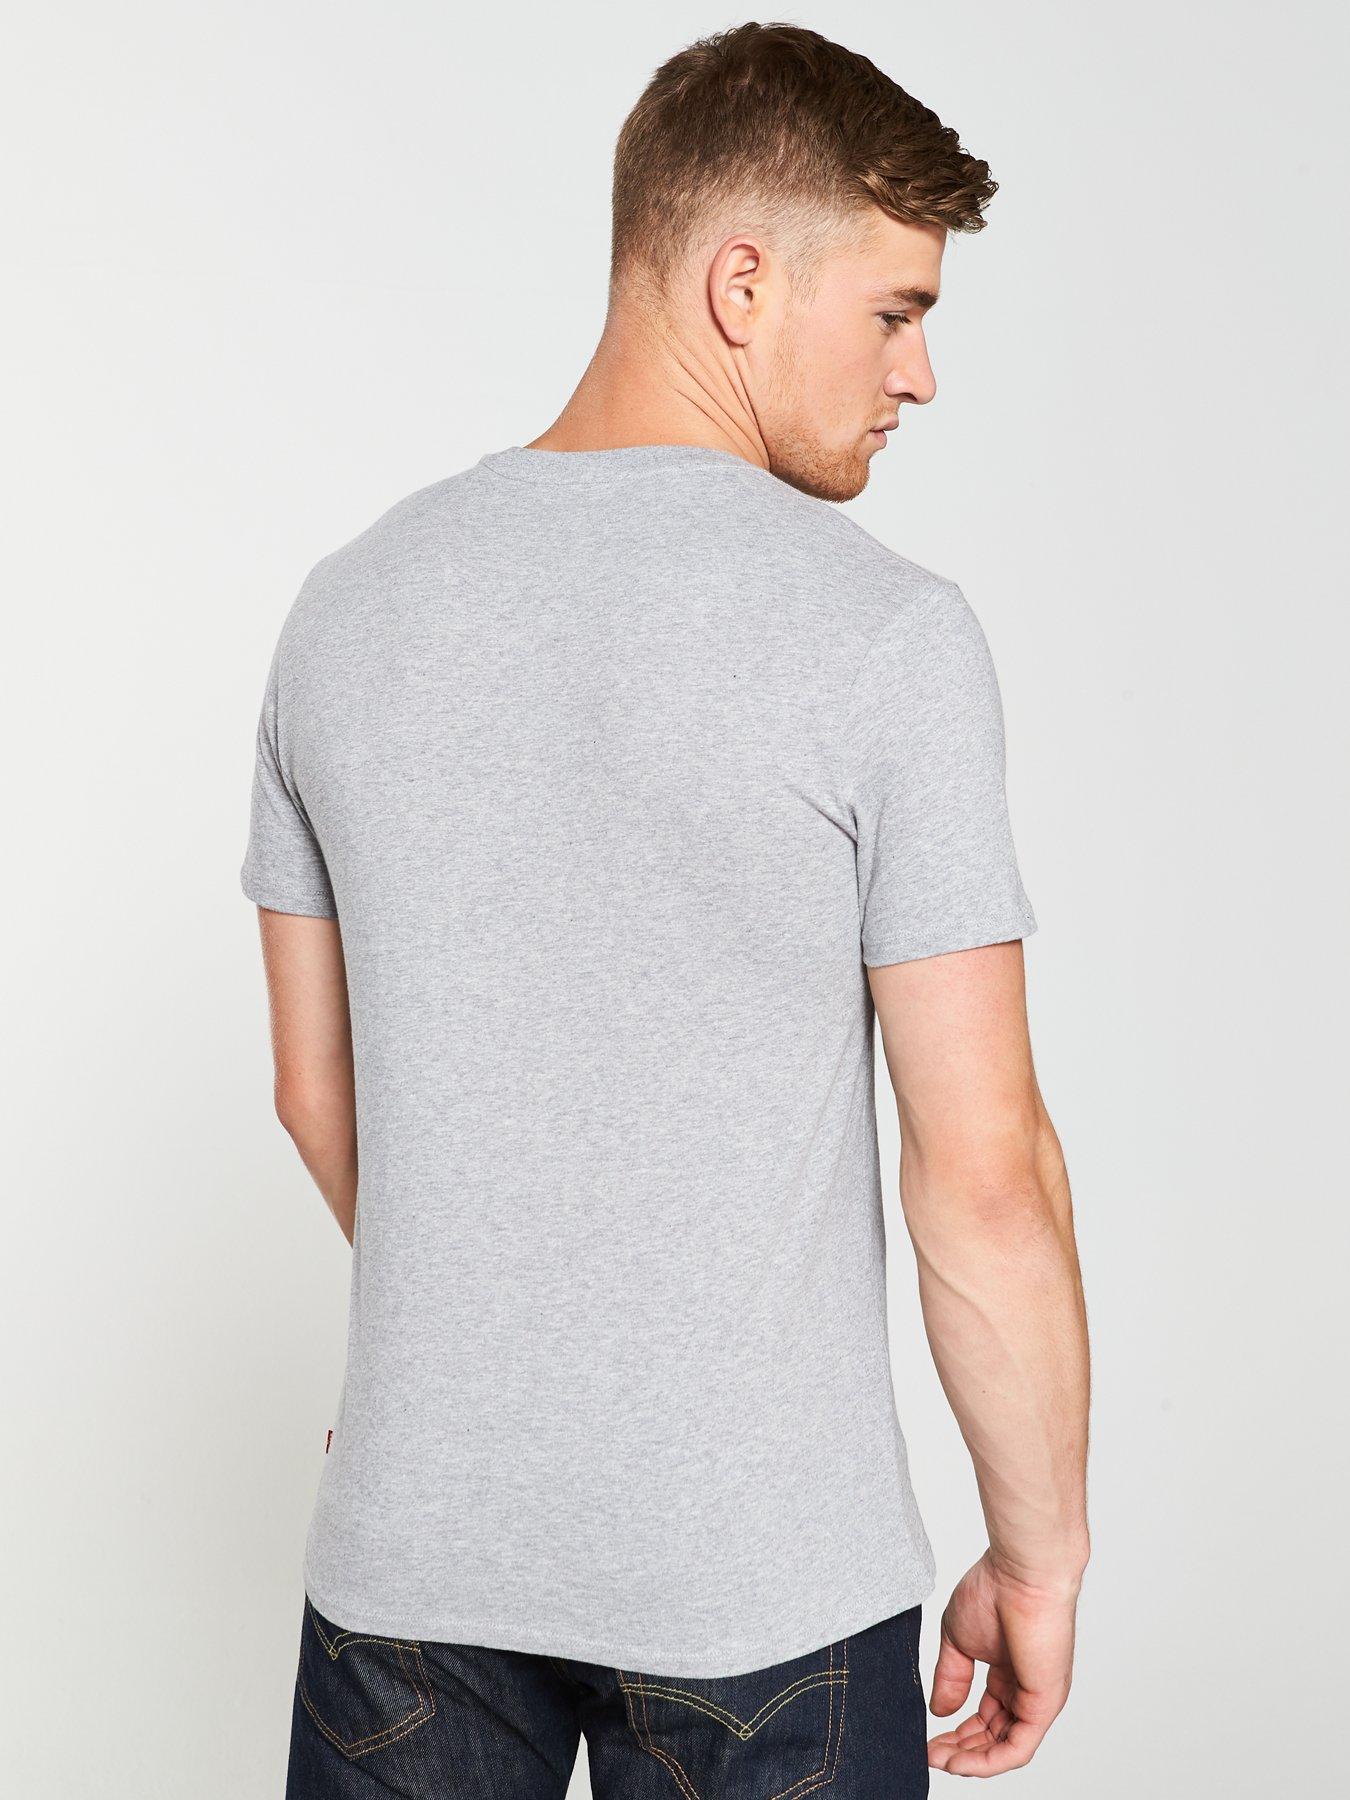 Levi's Batwing Graphic T-Shirt - Grey Heather 